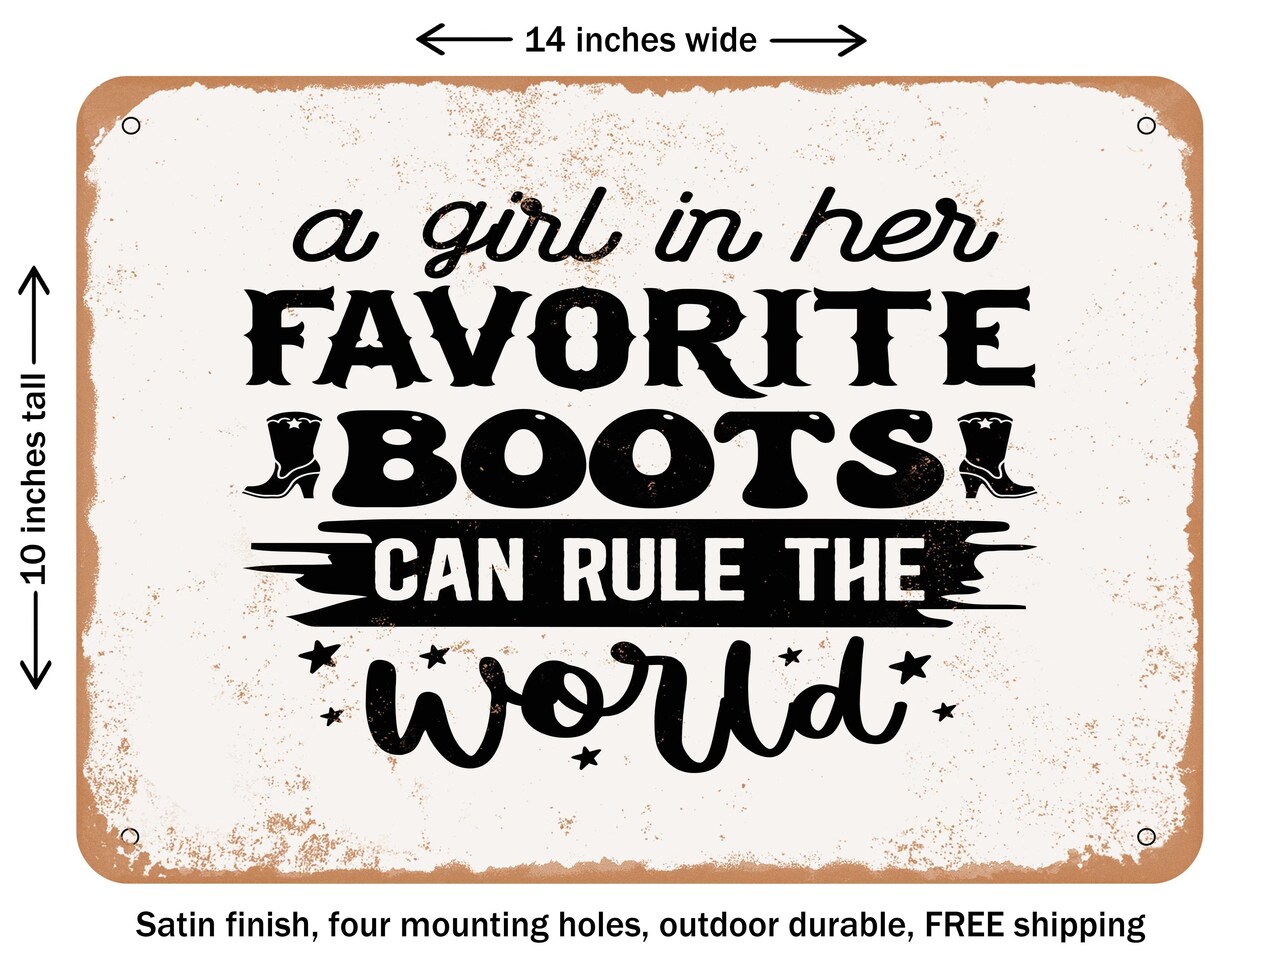 DECORATIVE METAL SIGN - a Girl In Her Favorite Boots Can Rule the World - Vintage Rusty Look